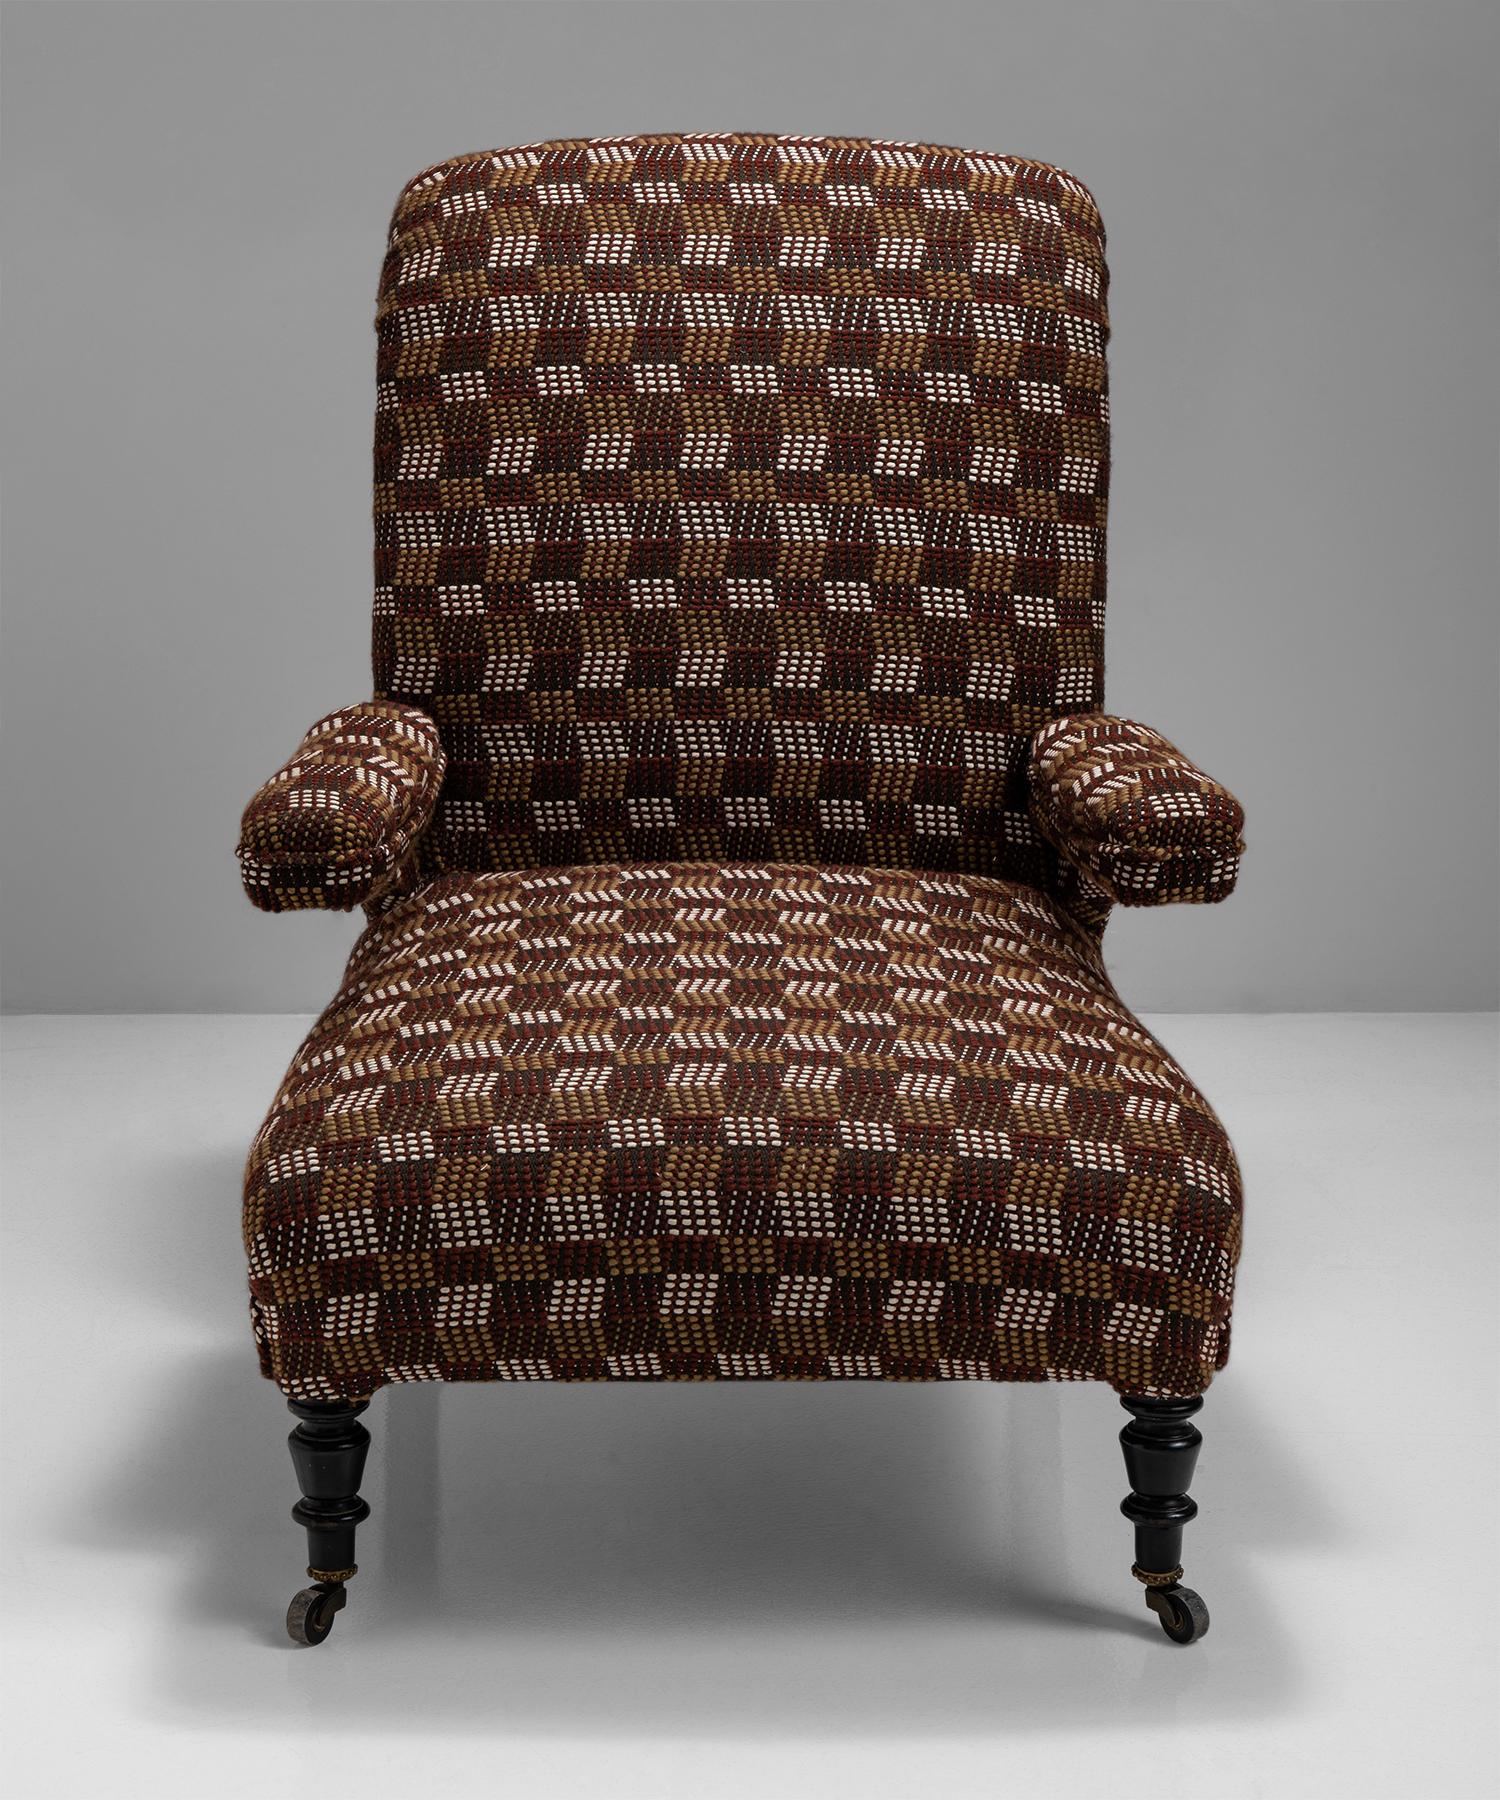 French Pair of Scroll Back Armchairs in Wool Blend from Pierre Frey, France, Circa 1890